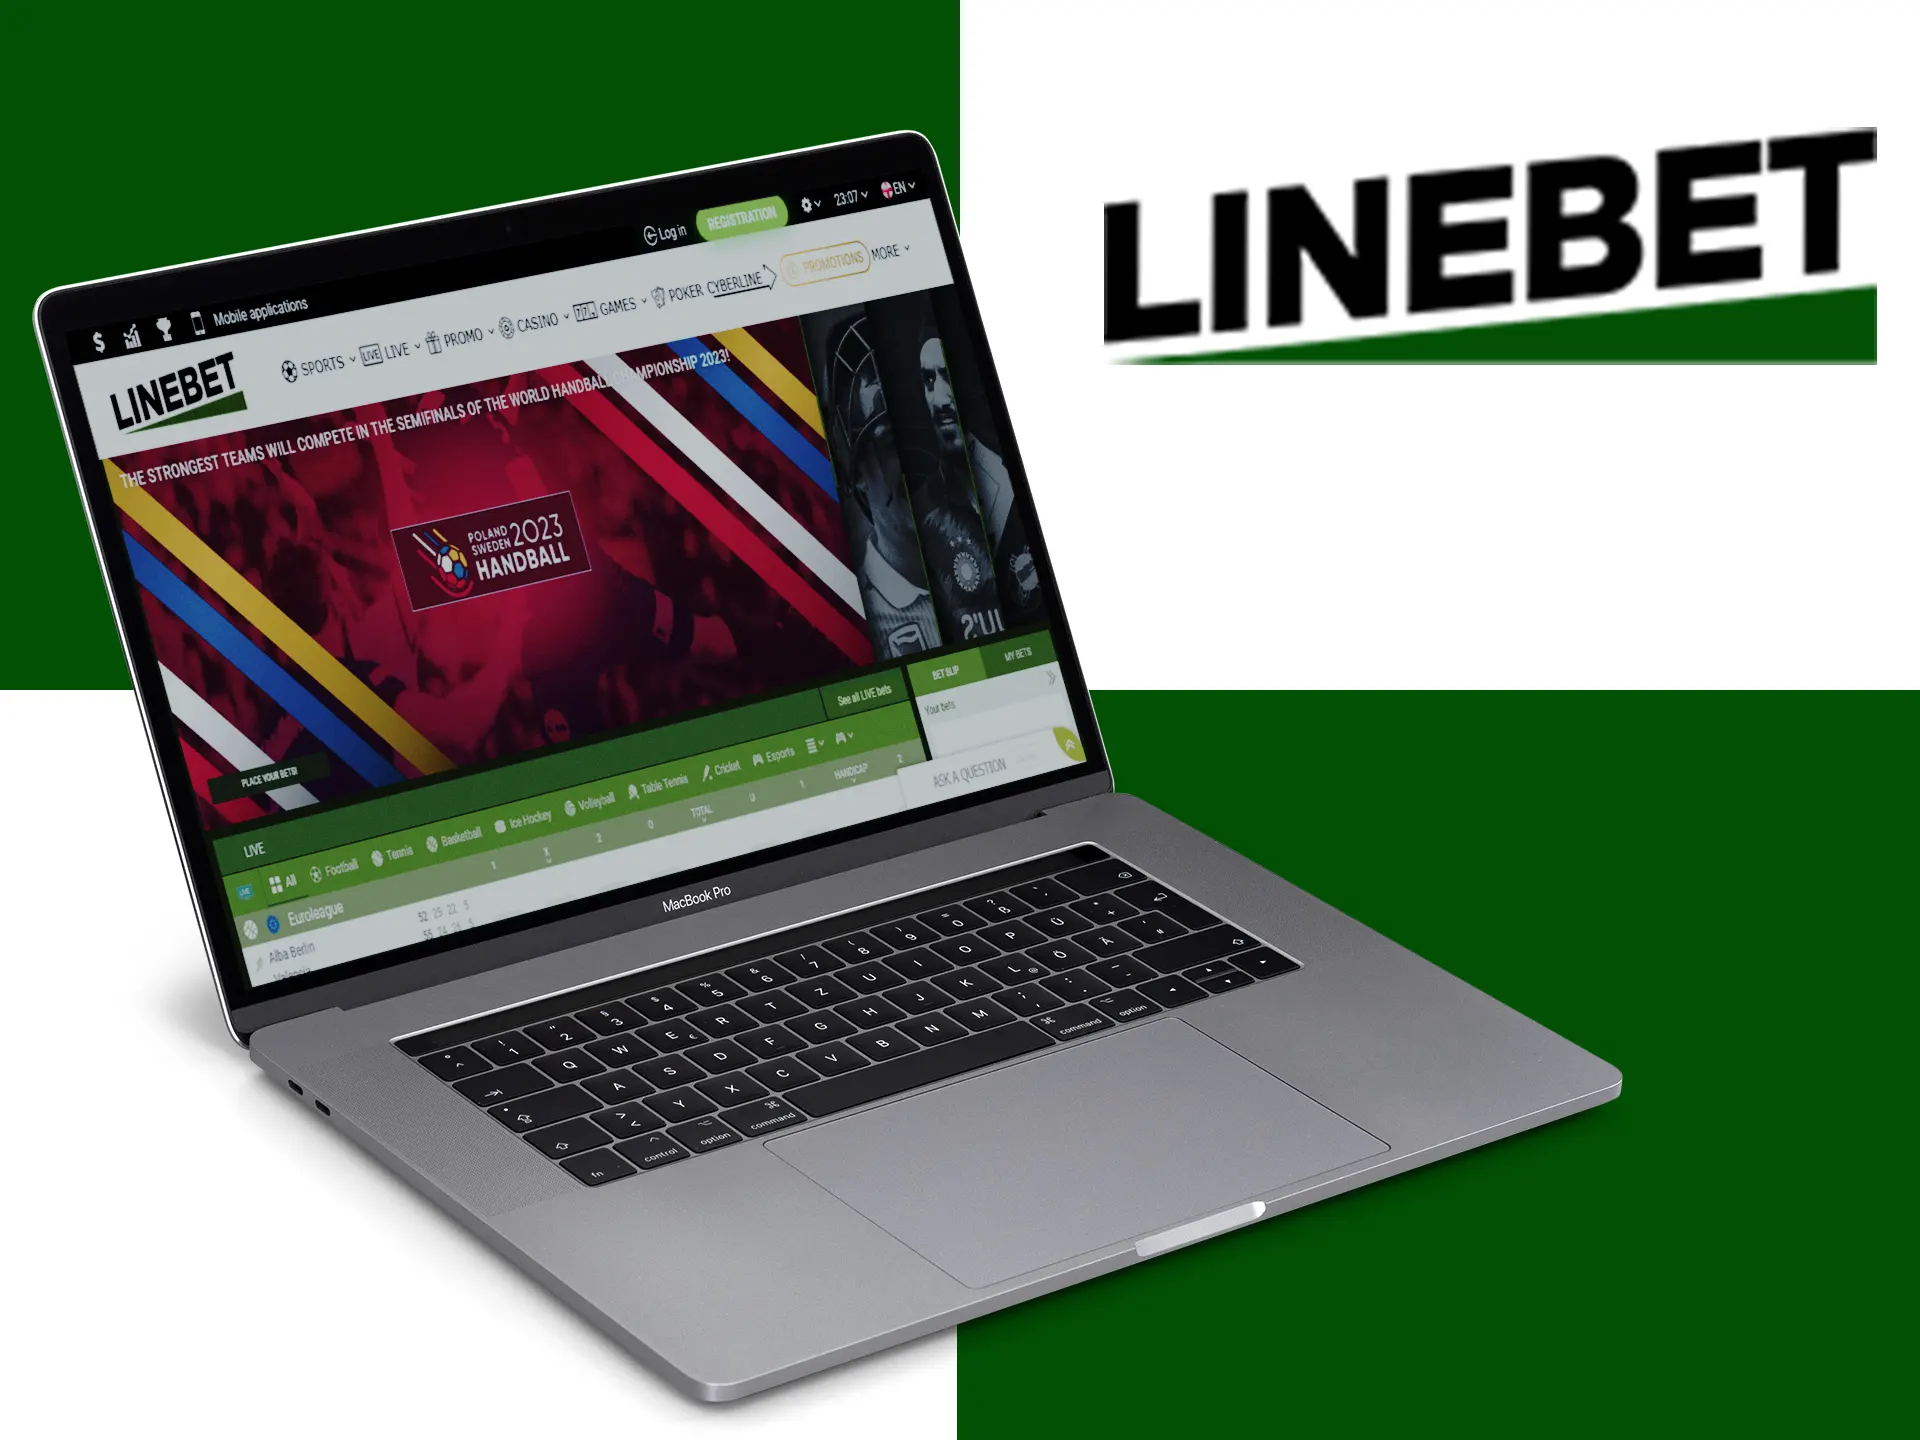 Linebet is a determined company that started to build its business from the ground up in 2019, you can now enjoy secure gaming on the bookmaker's website, licensed by Curacao.